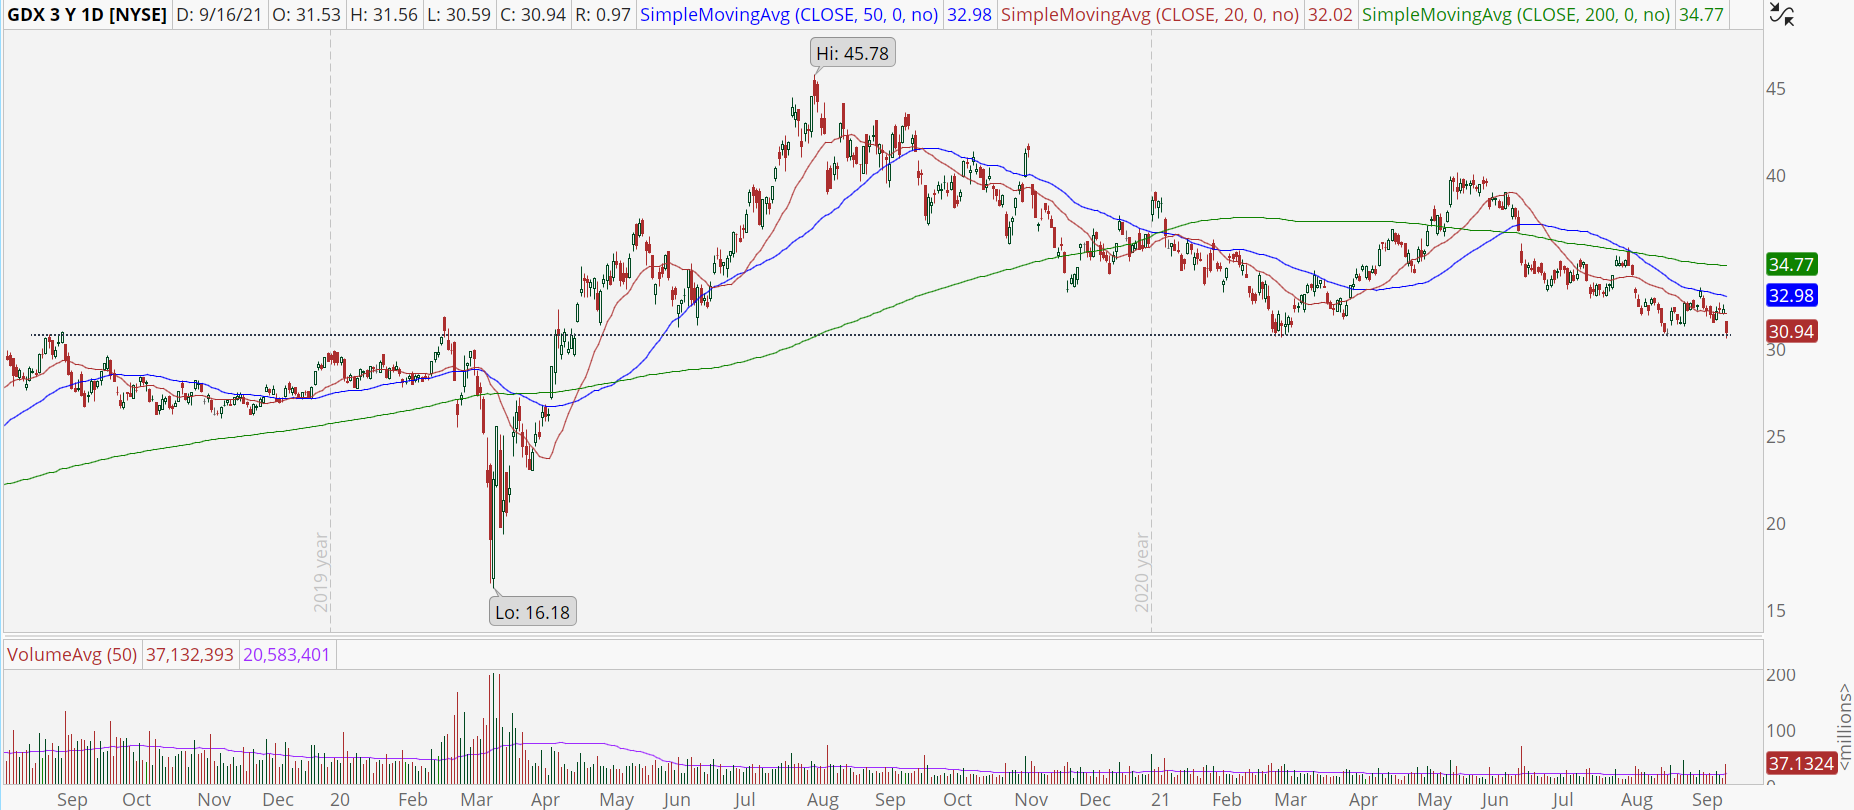 Gold Miners ETF (GDX) with major support test